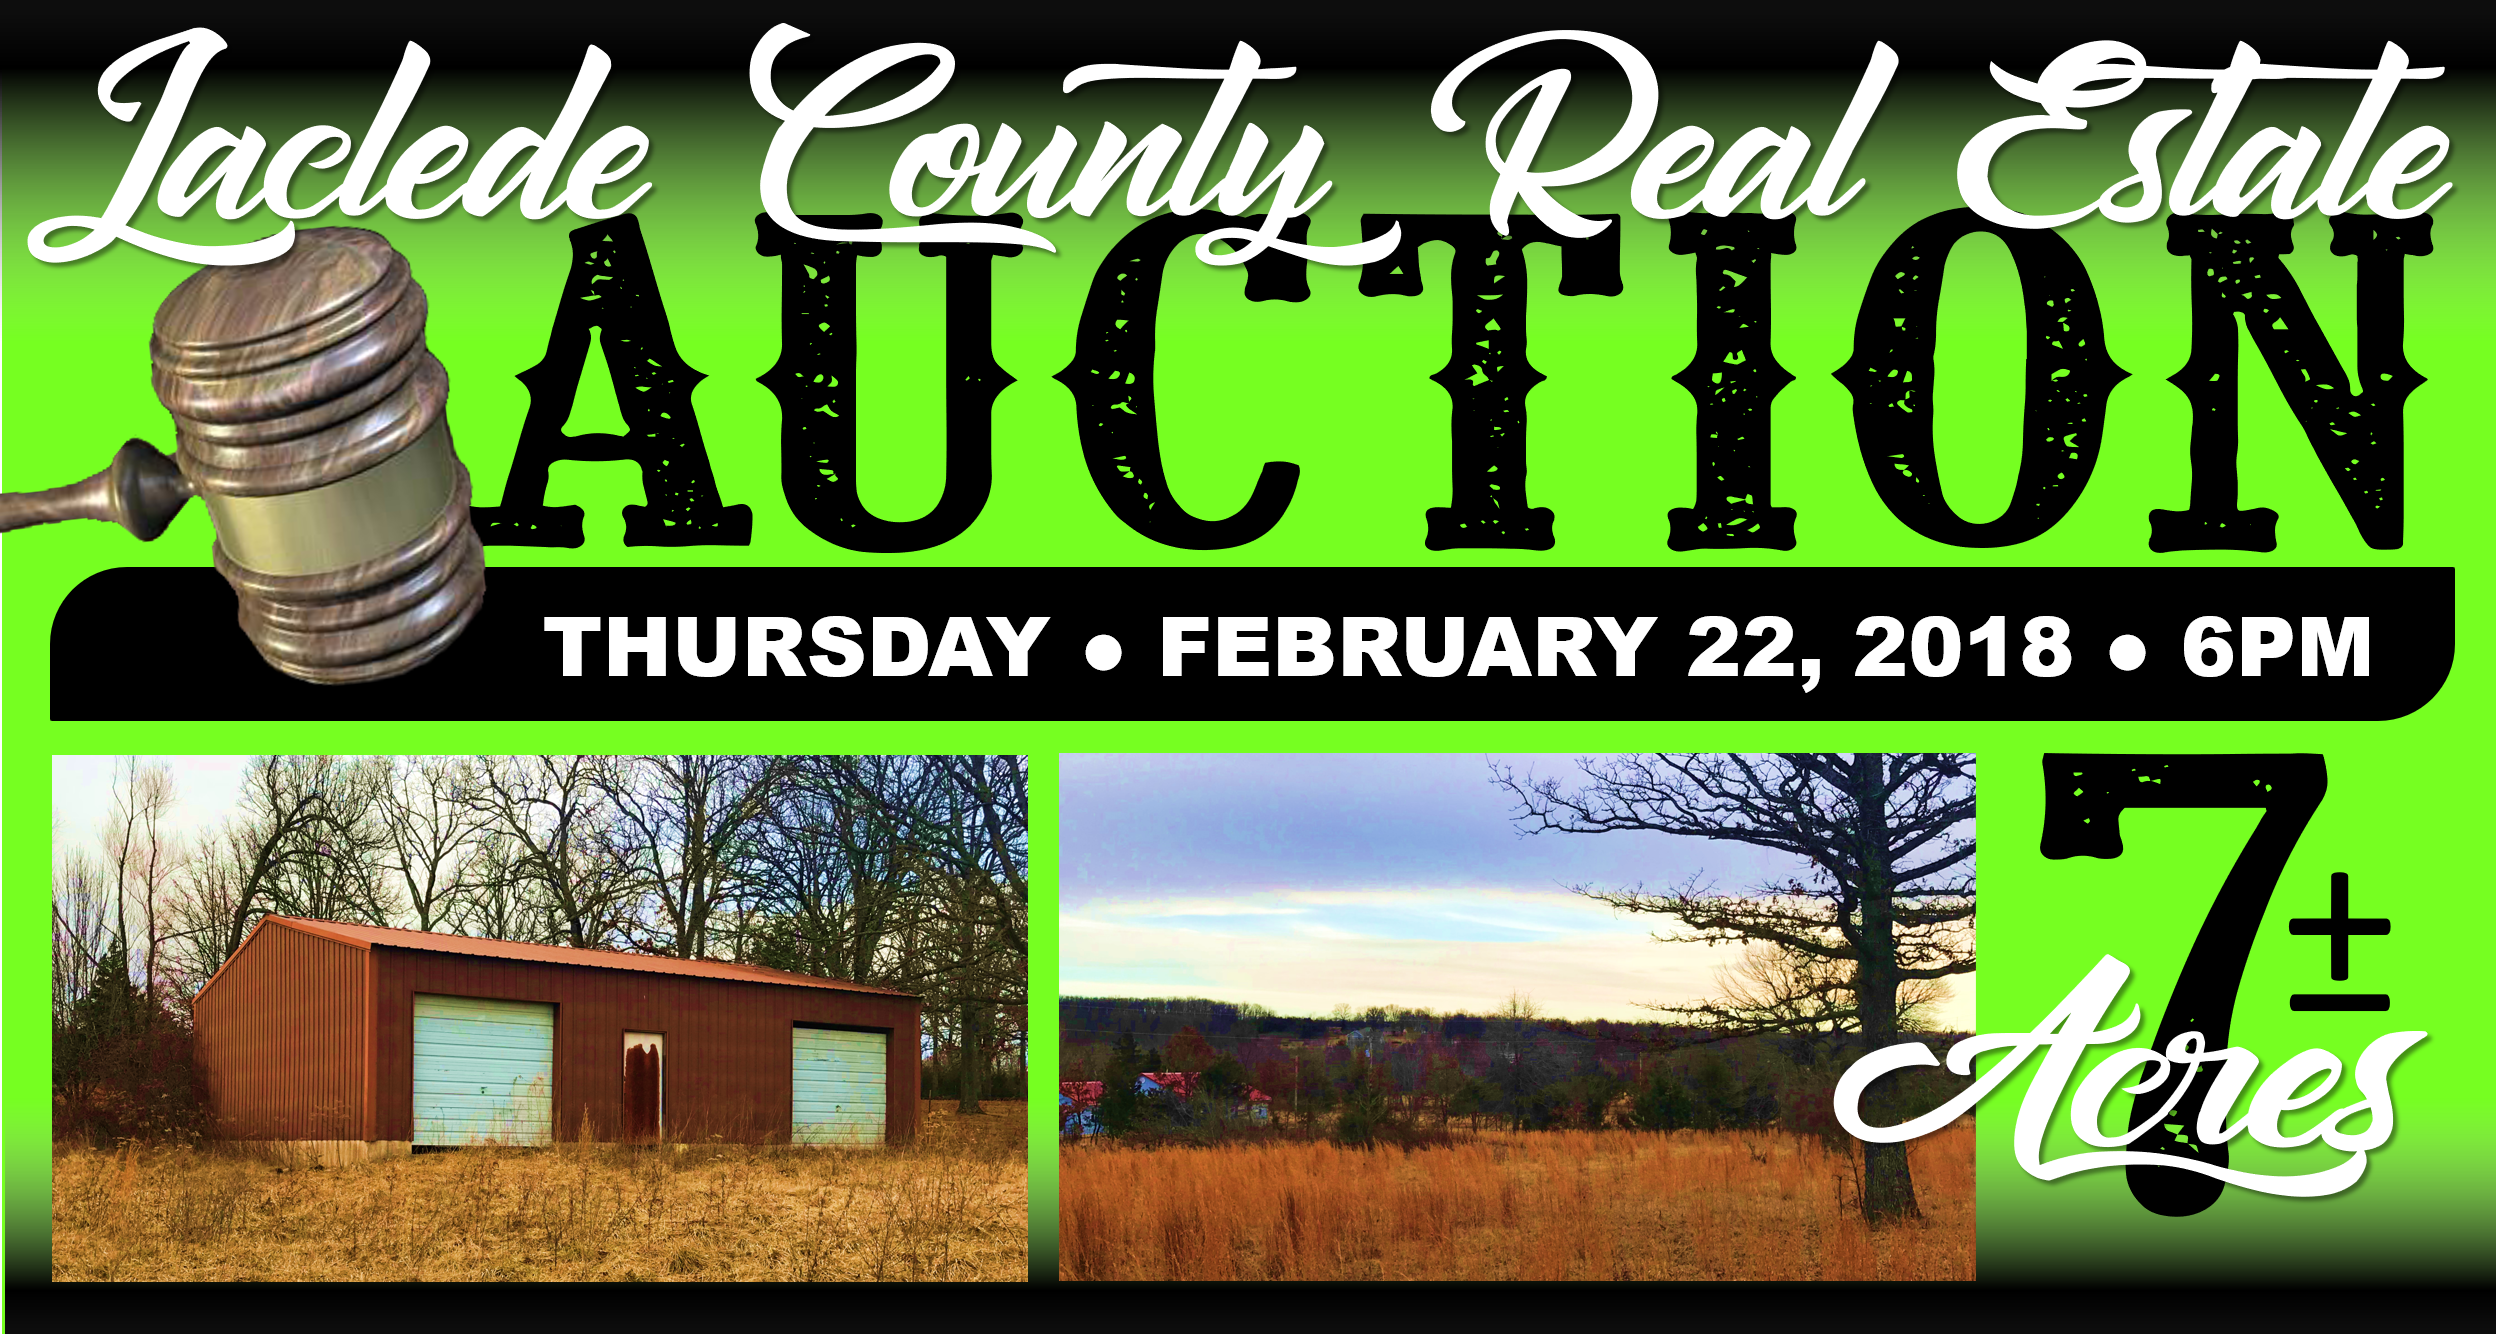 LACLEDE COUNTY REAL ESTATE AUCTION